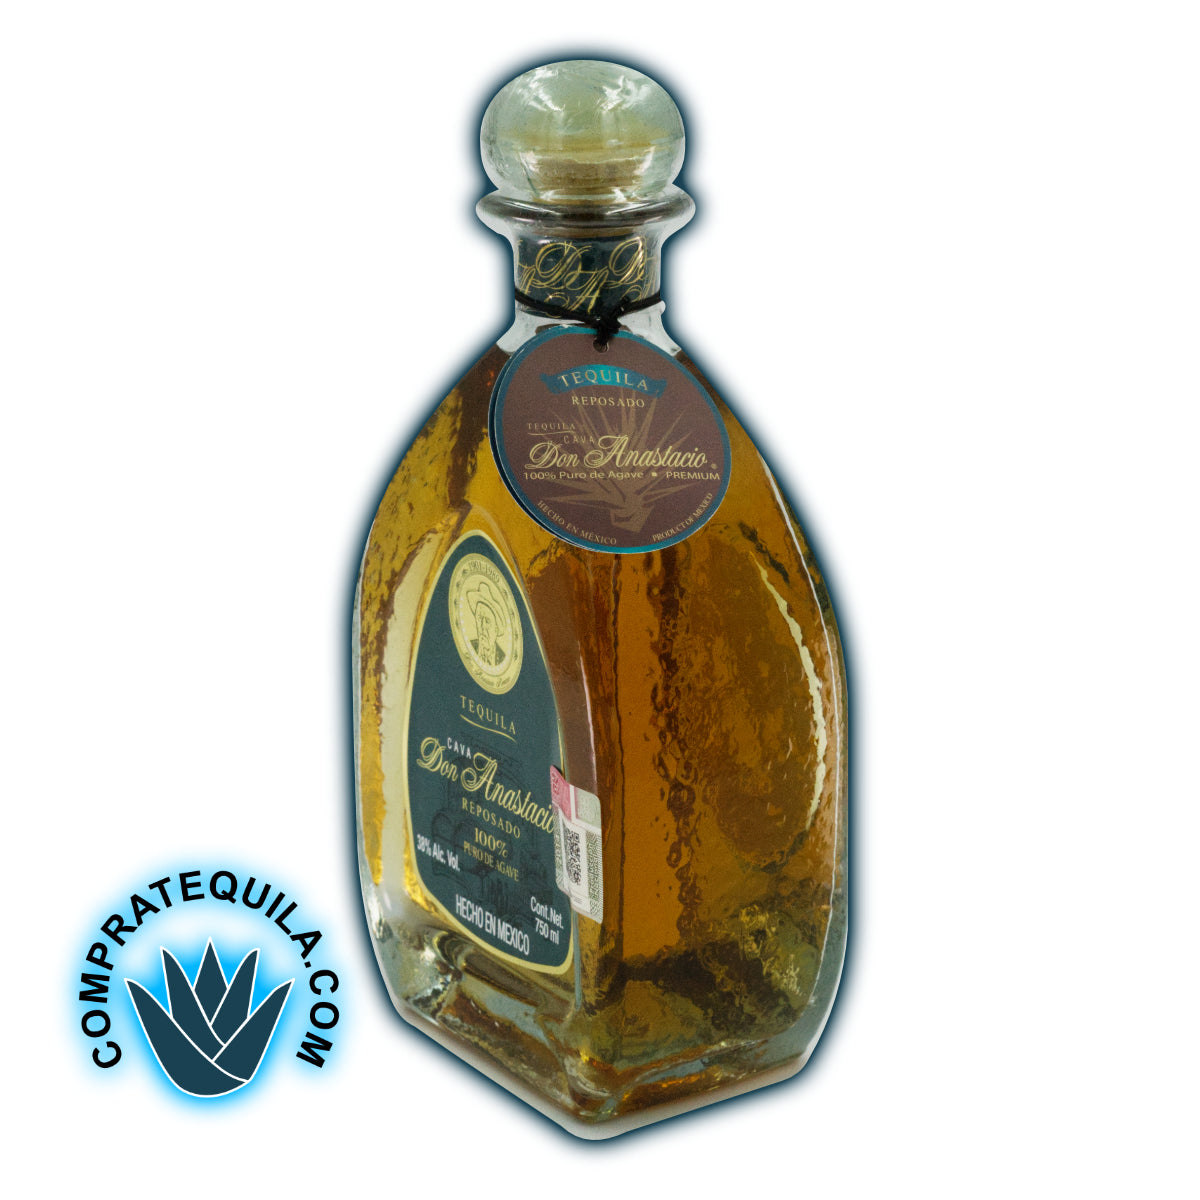 Don Anastacio Reposado Tequila: A unique experience of flavor and quality, available at Compratequila.com